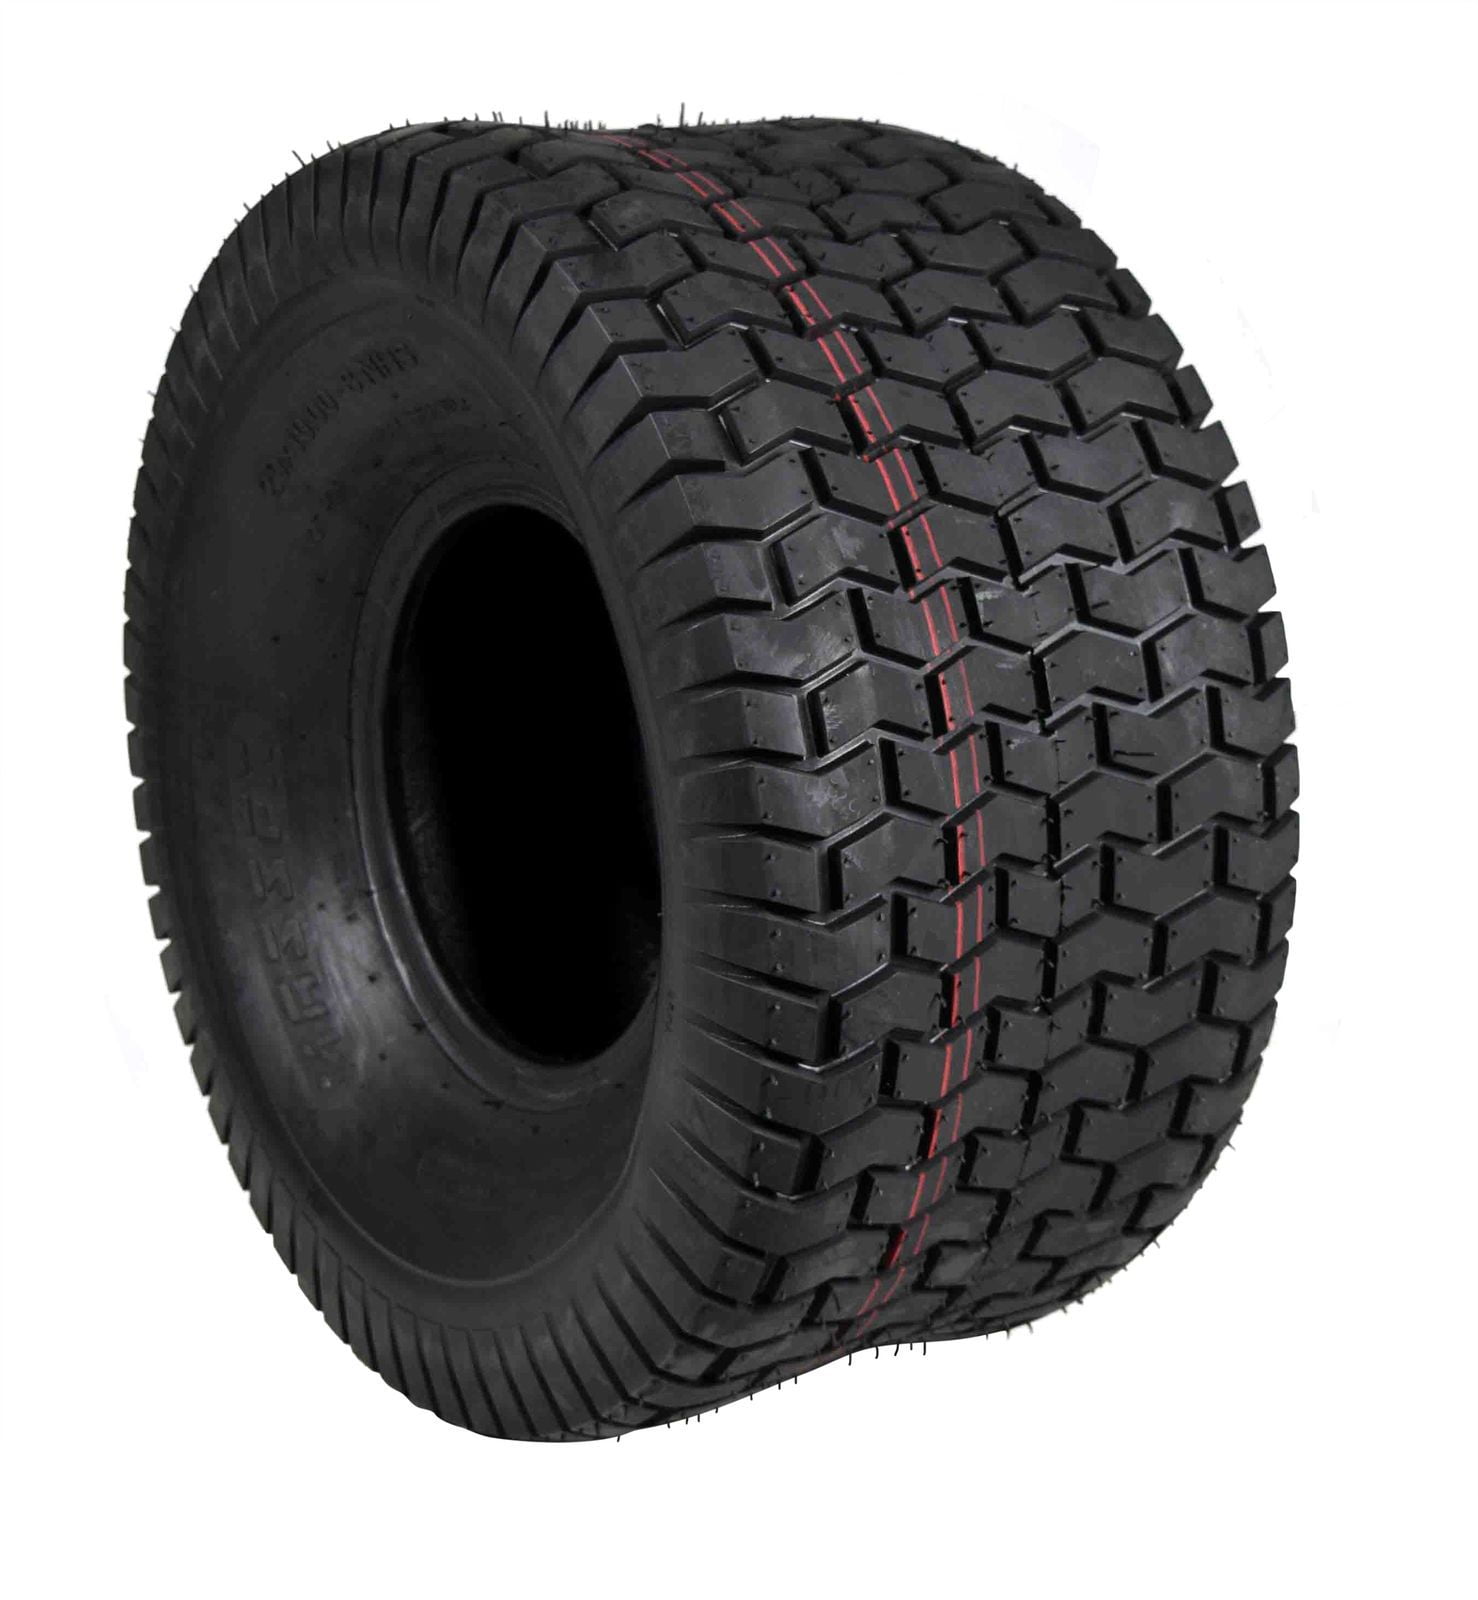 Massfx 20x10 8 Lawn And Garden Lawn Mower And Tractor Mower Tire 4 Ply With 6mm Tread Depth 20x10x8